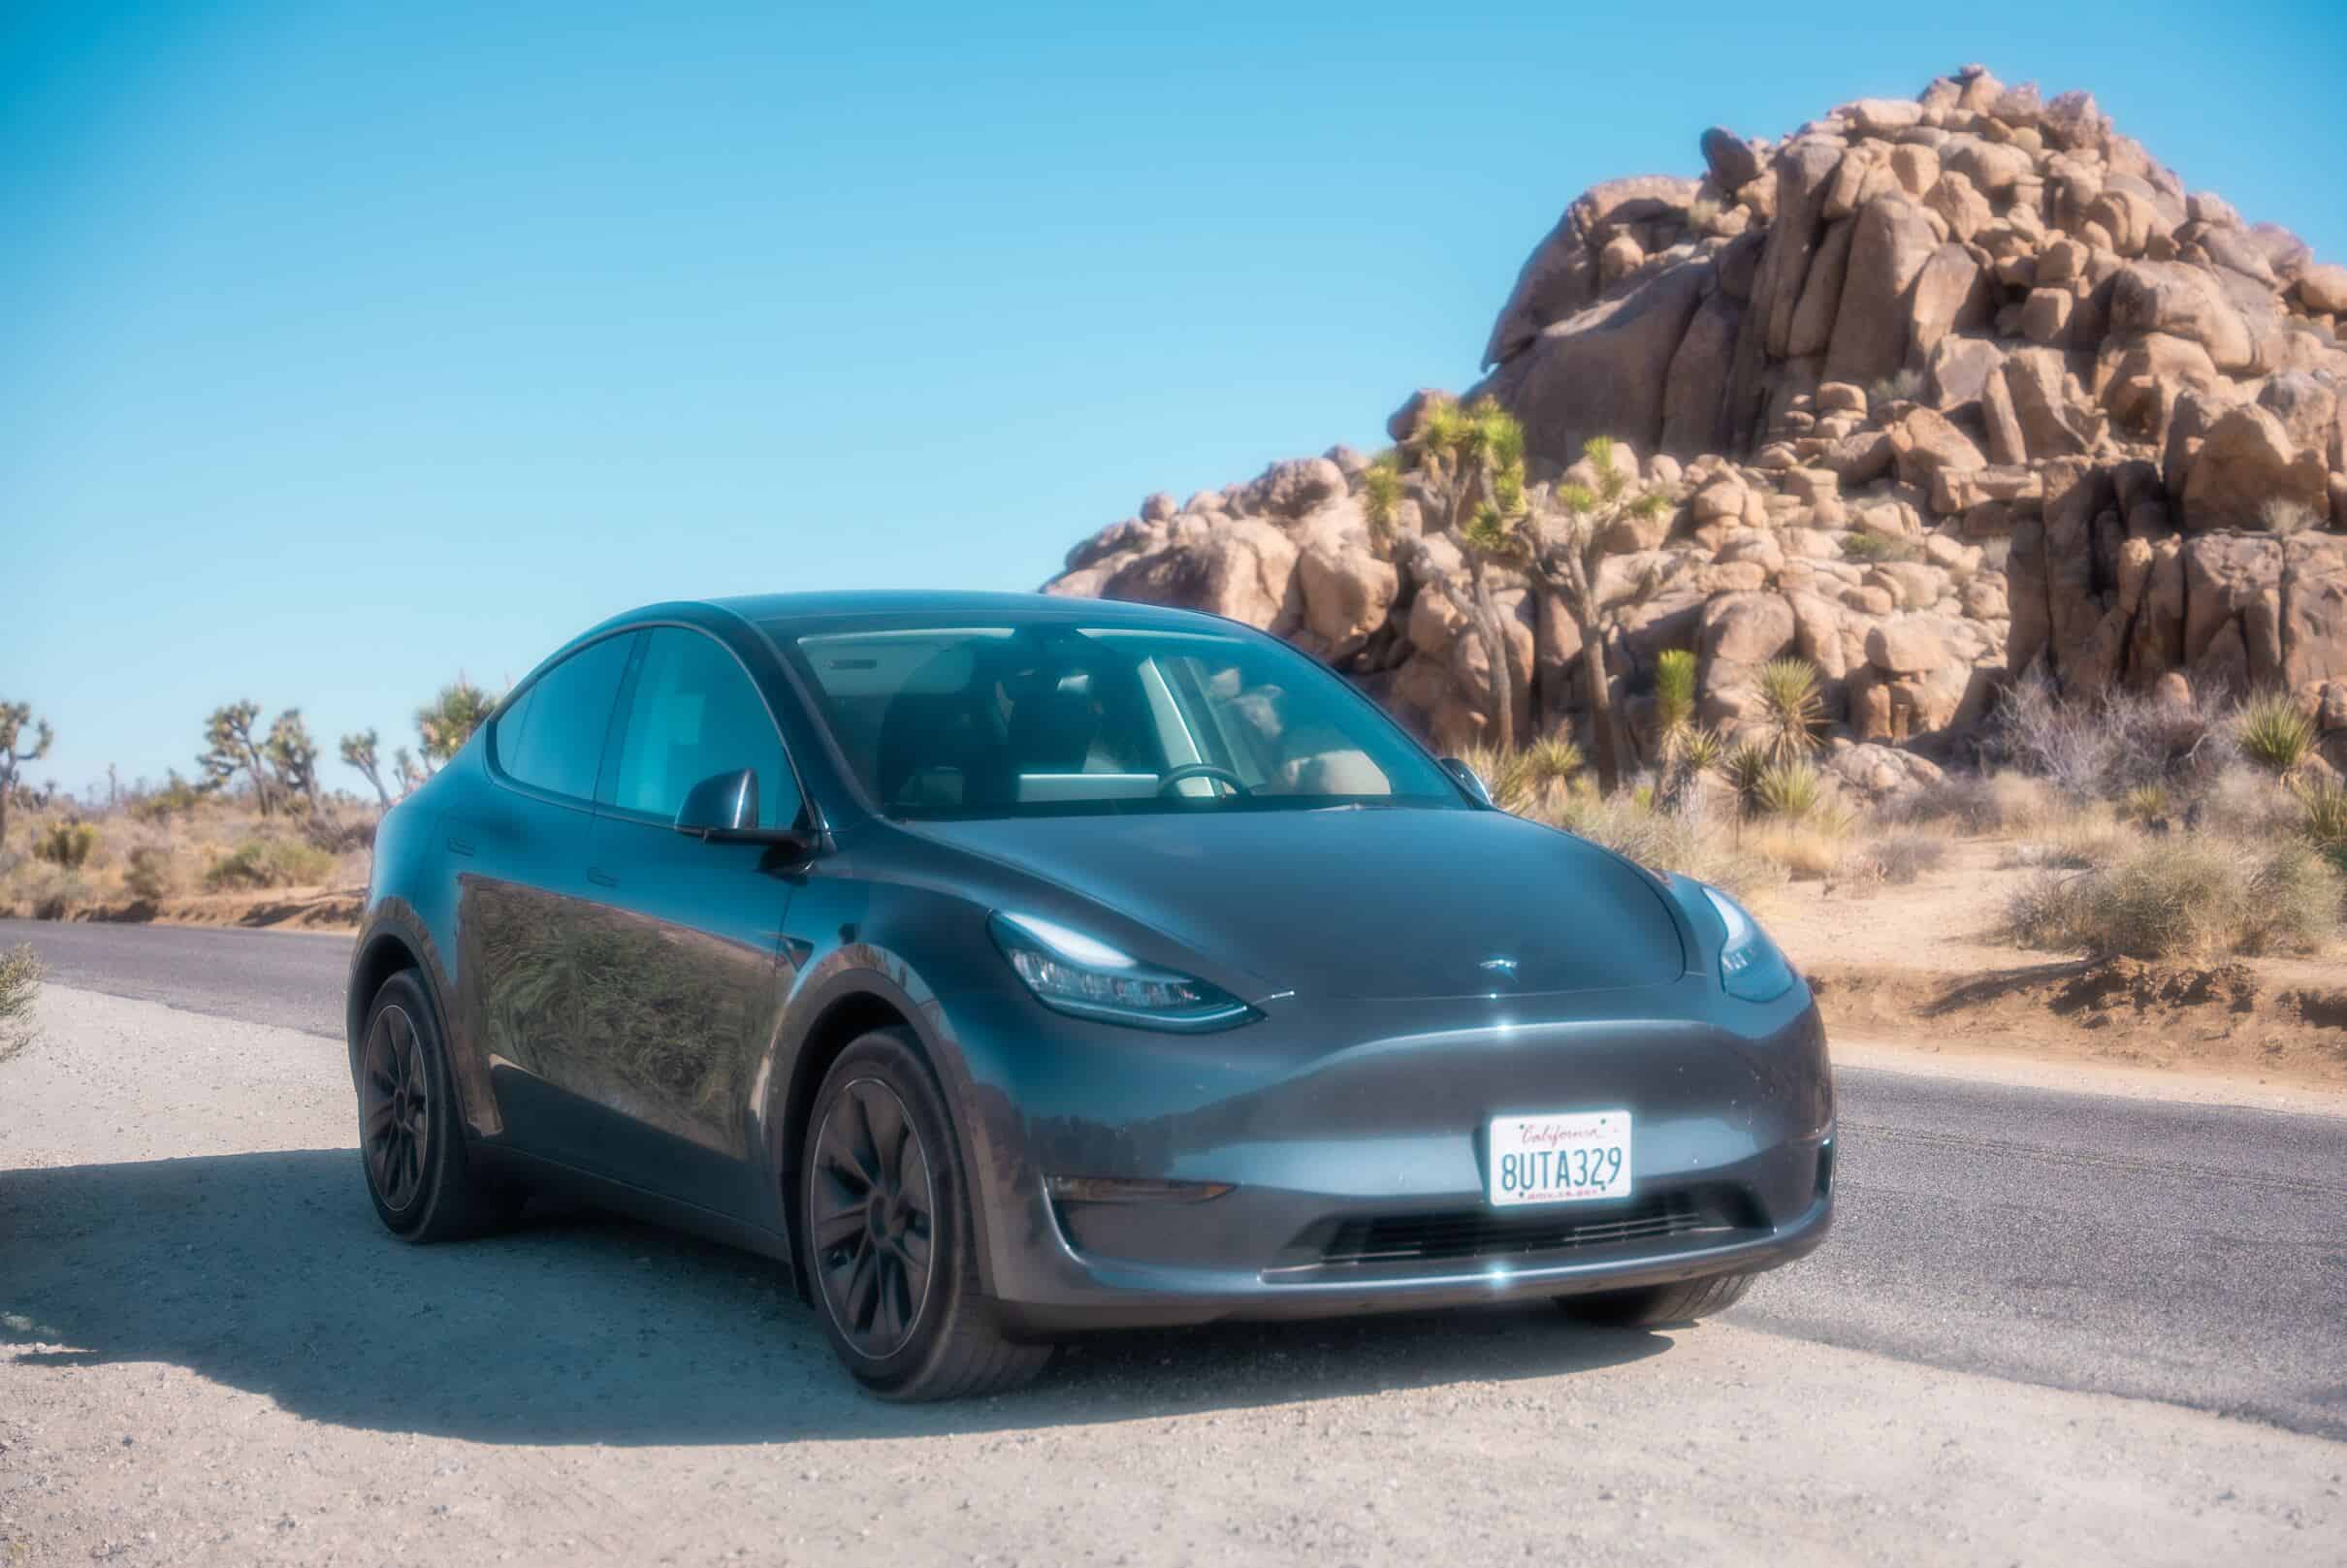 Tesla Model Y: A red Tesla Model Y parked in a scenic outdoor location, highlighting its eco-friendly design and family-friendly features.